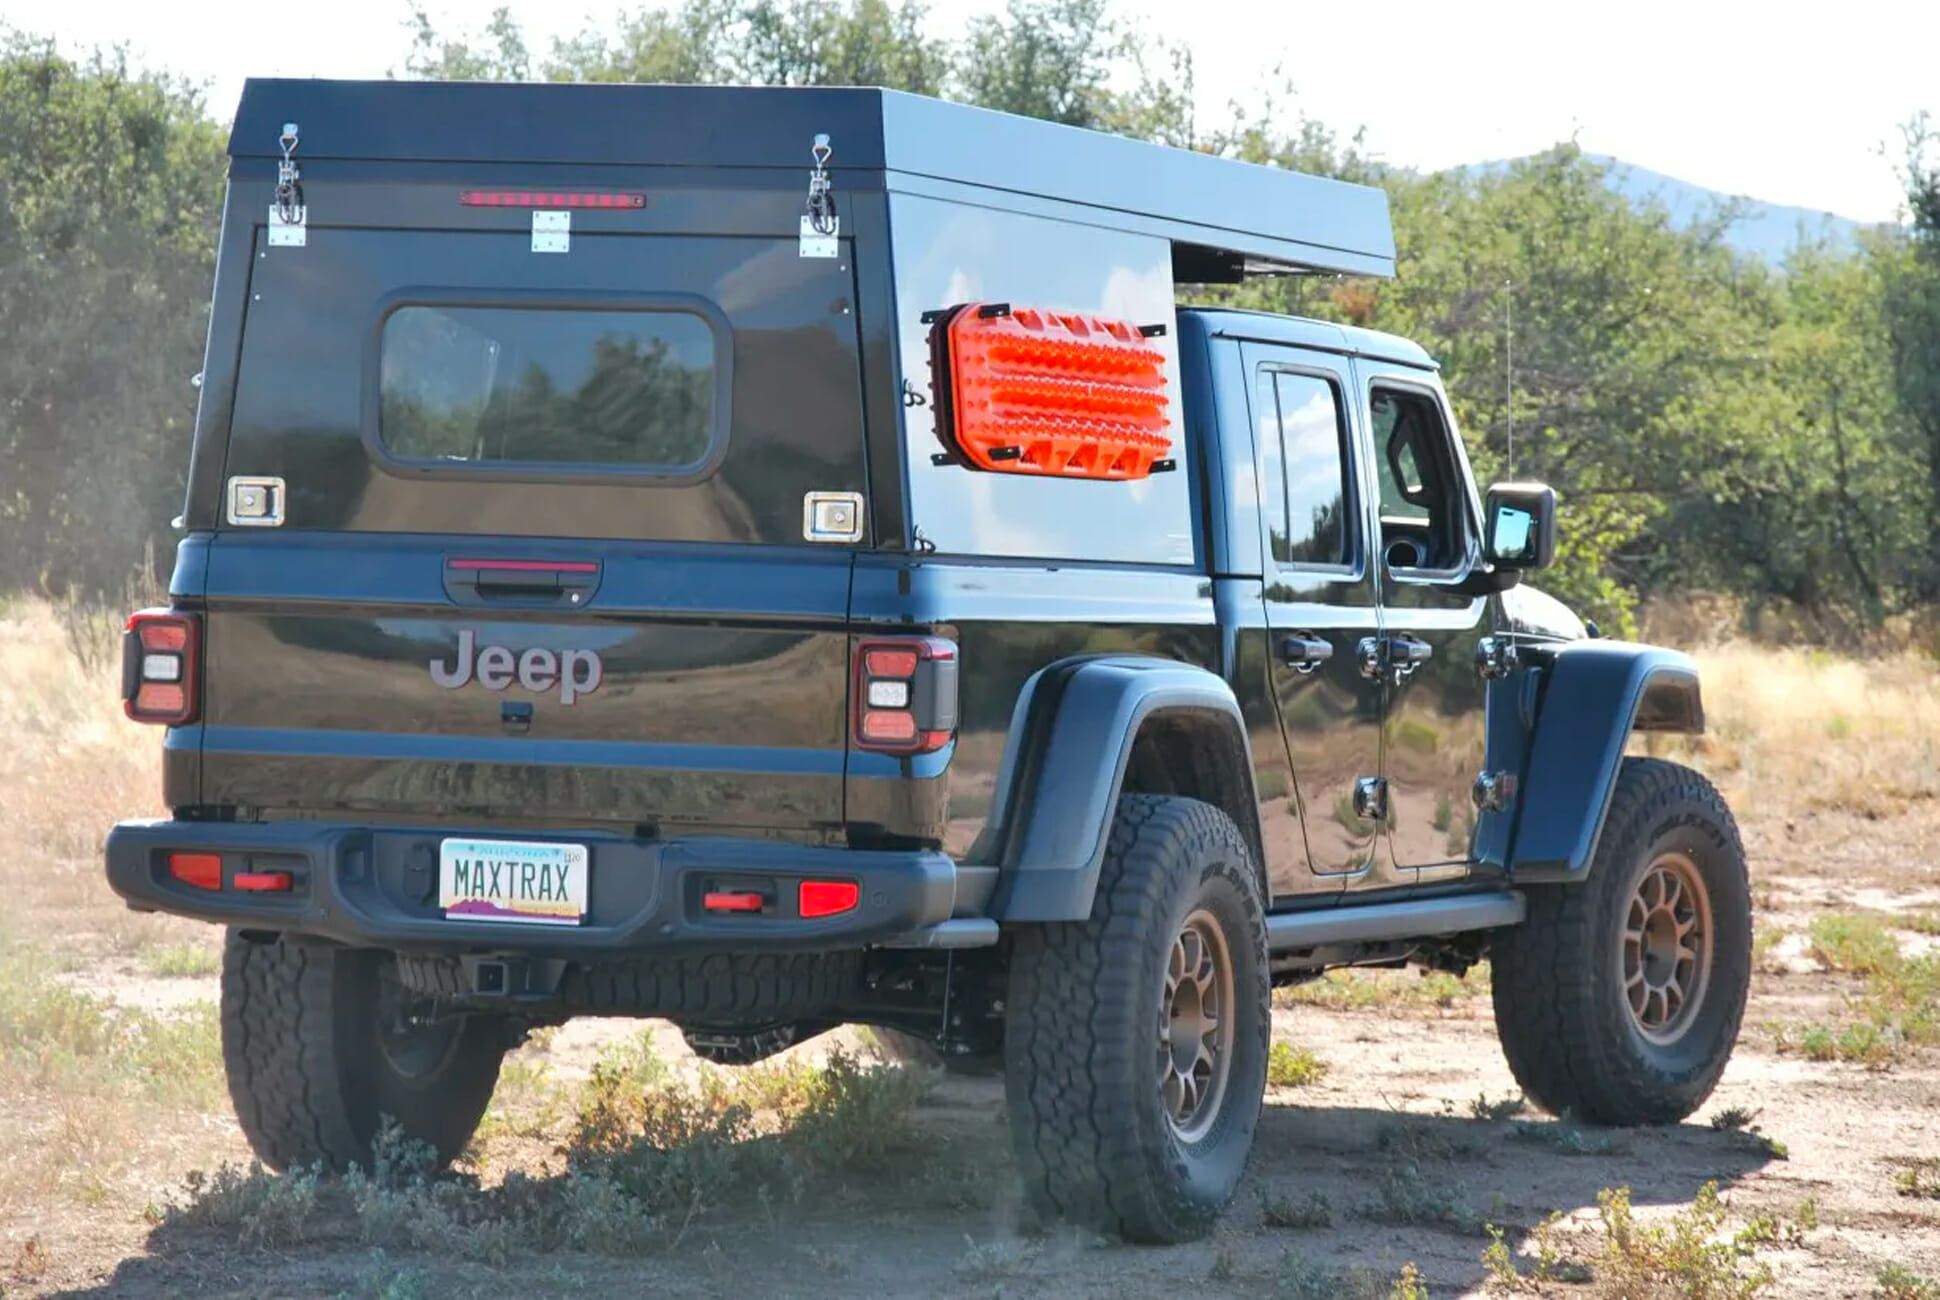 Turn Your Jeep Gladiator Into an Overlanding Camper With This Truck Topper